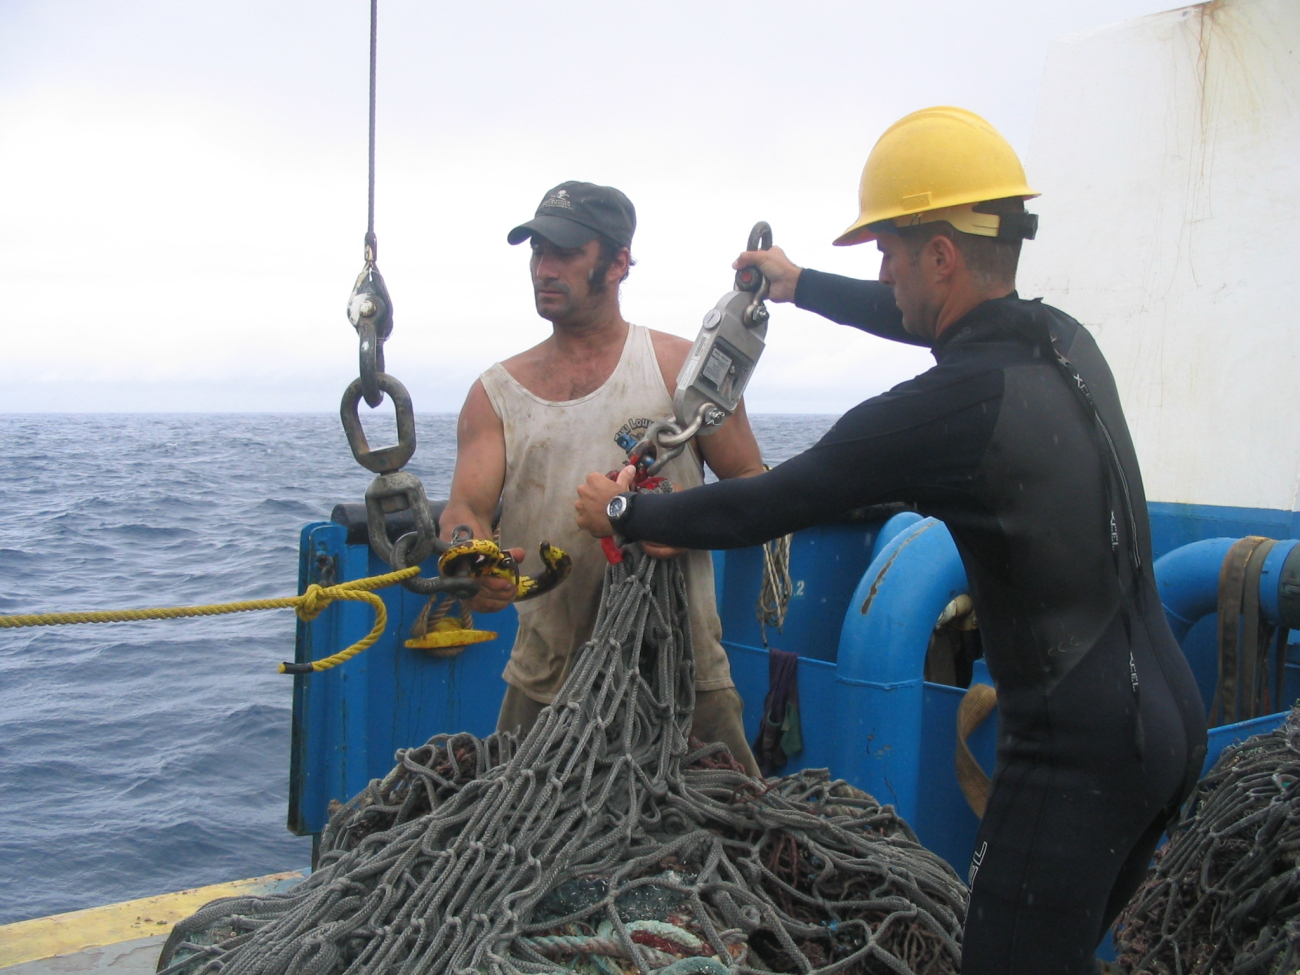 Preparing to weight derelict net that had just been lifted onto the CASITAS